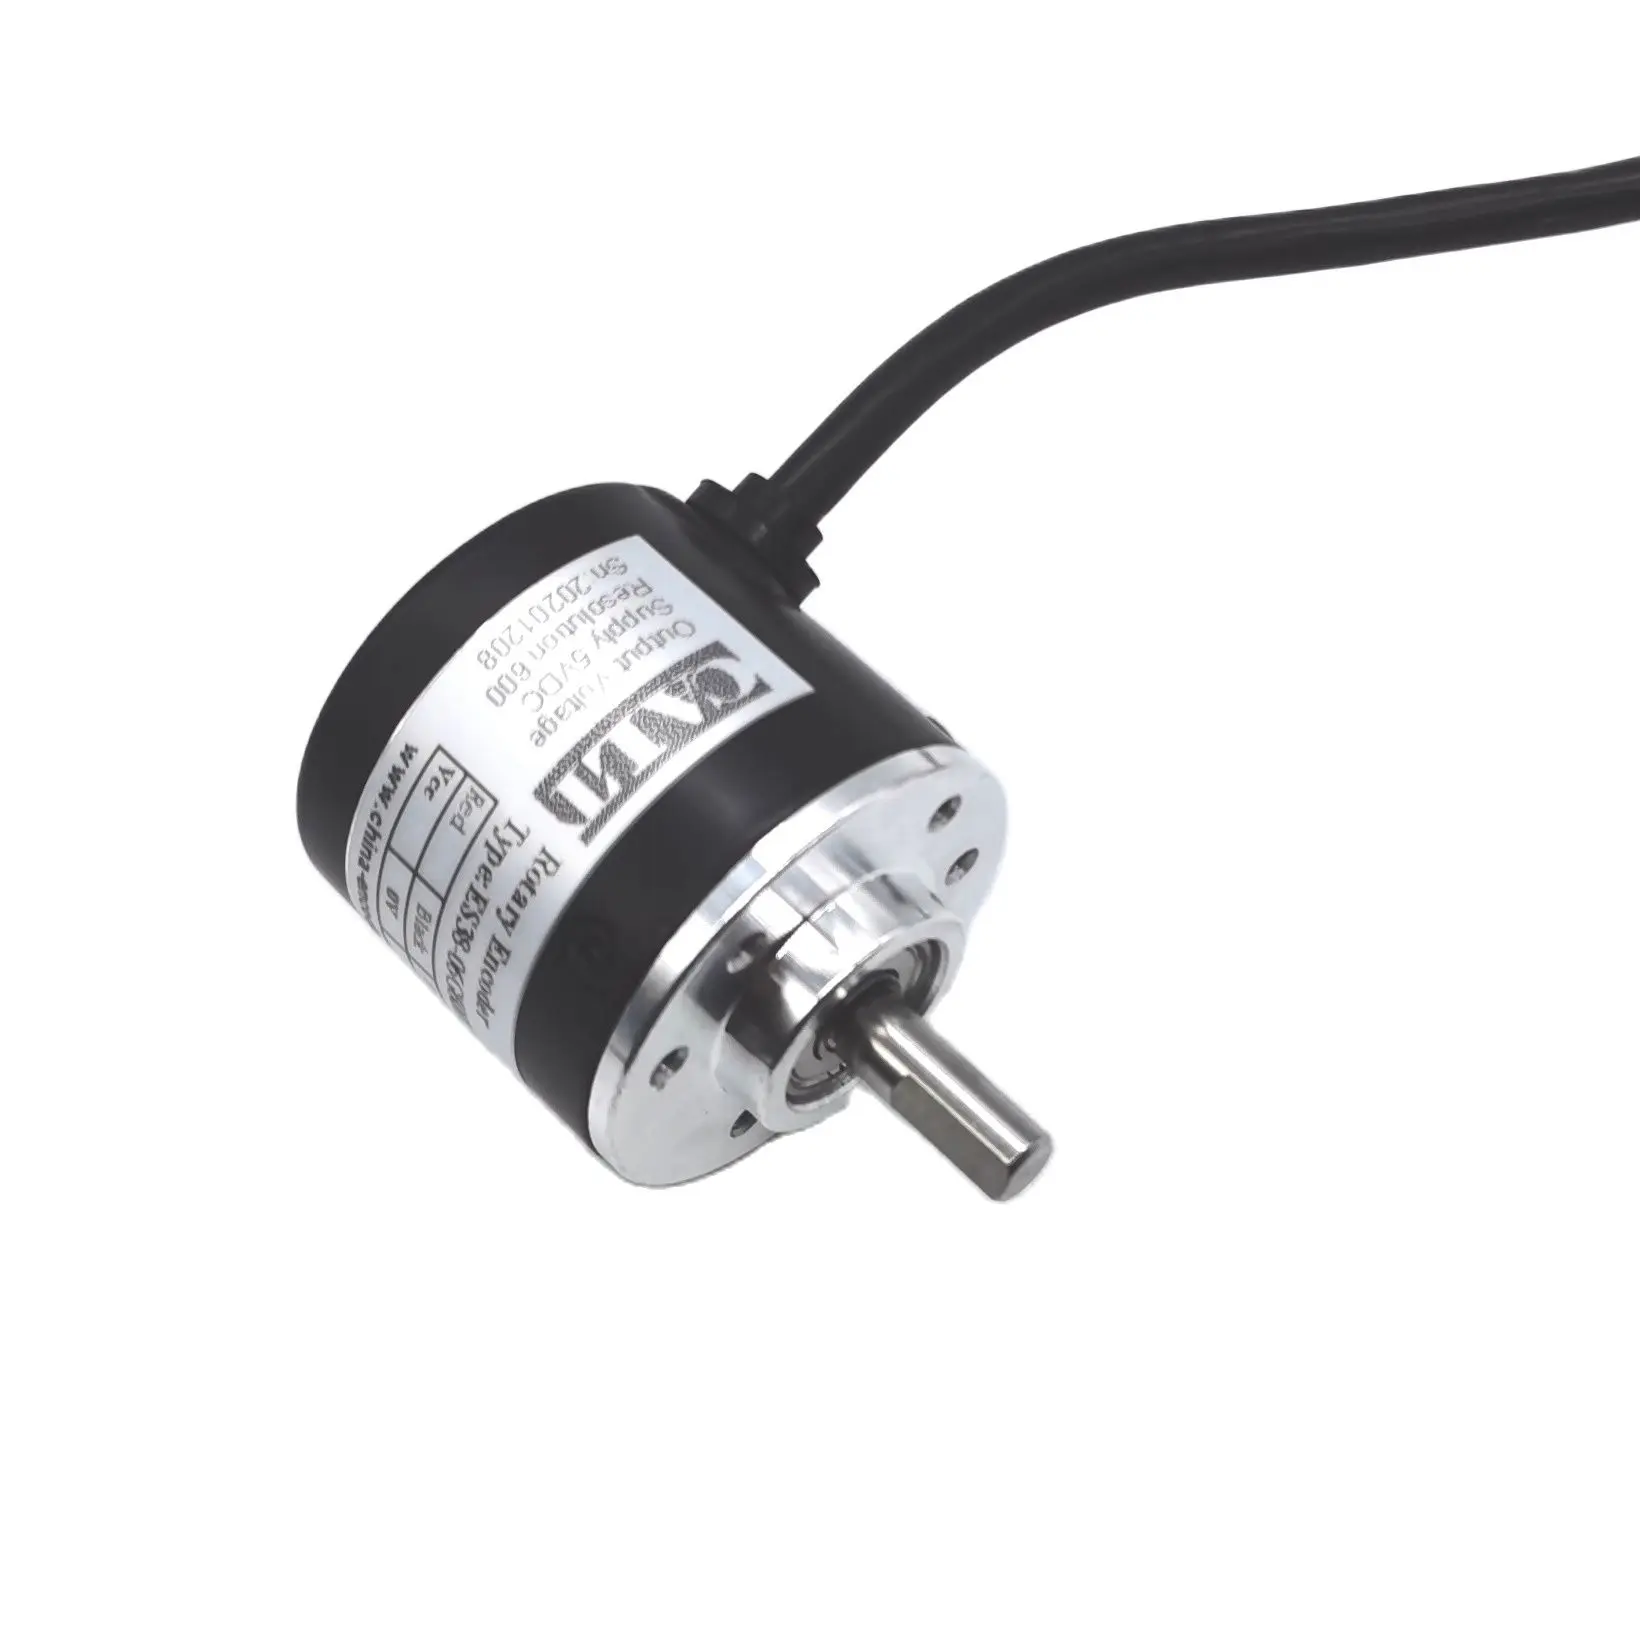 Rotary Encoder 5~26V AB 2-Phase Incremental Rotary Encoder 1000PPR Universal Signal Encoder 6mm Spindle Shaft with 2M Cable for Numerical Control 